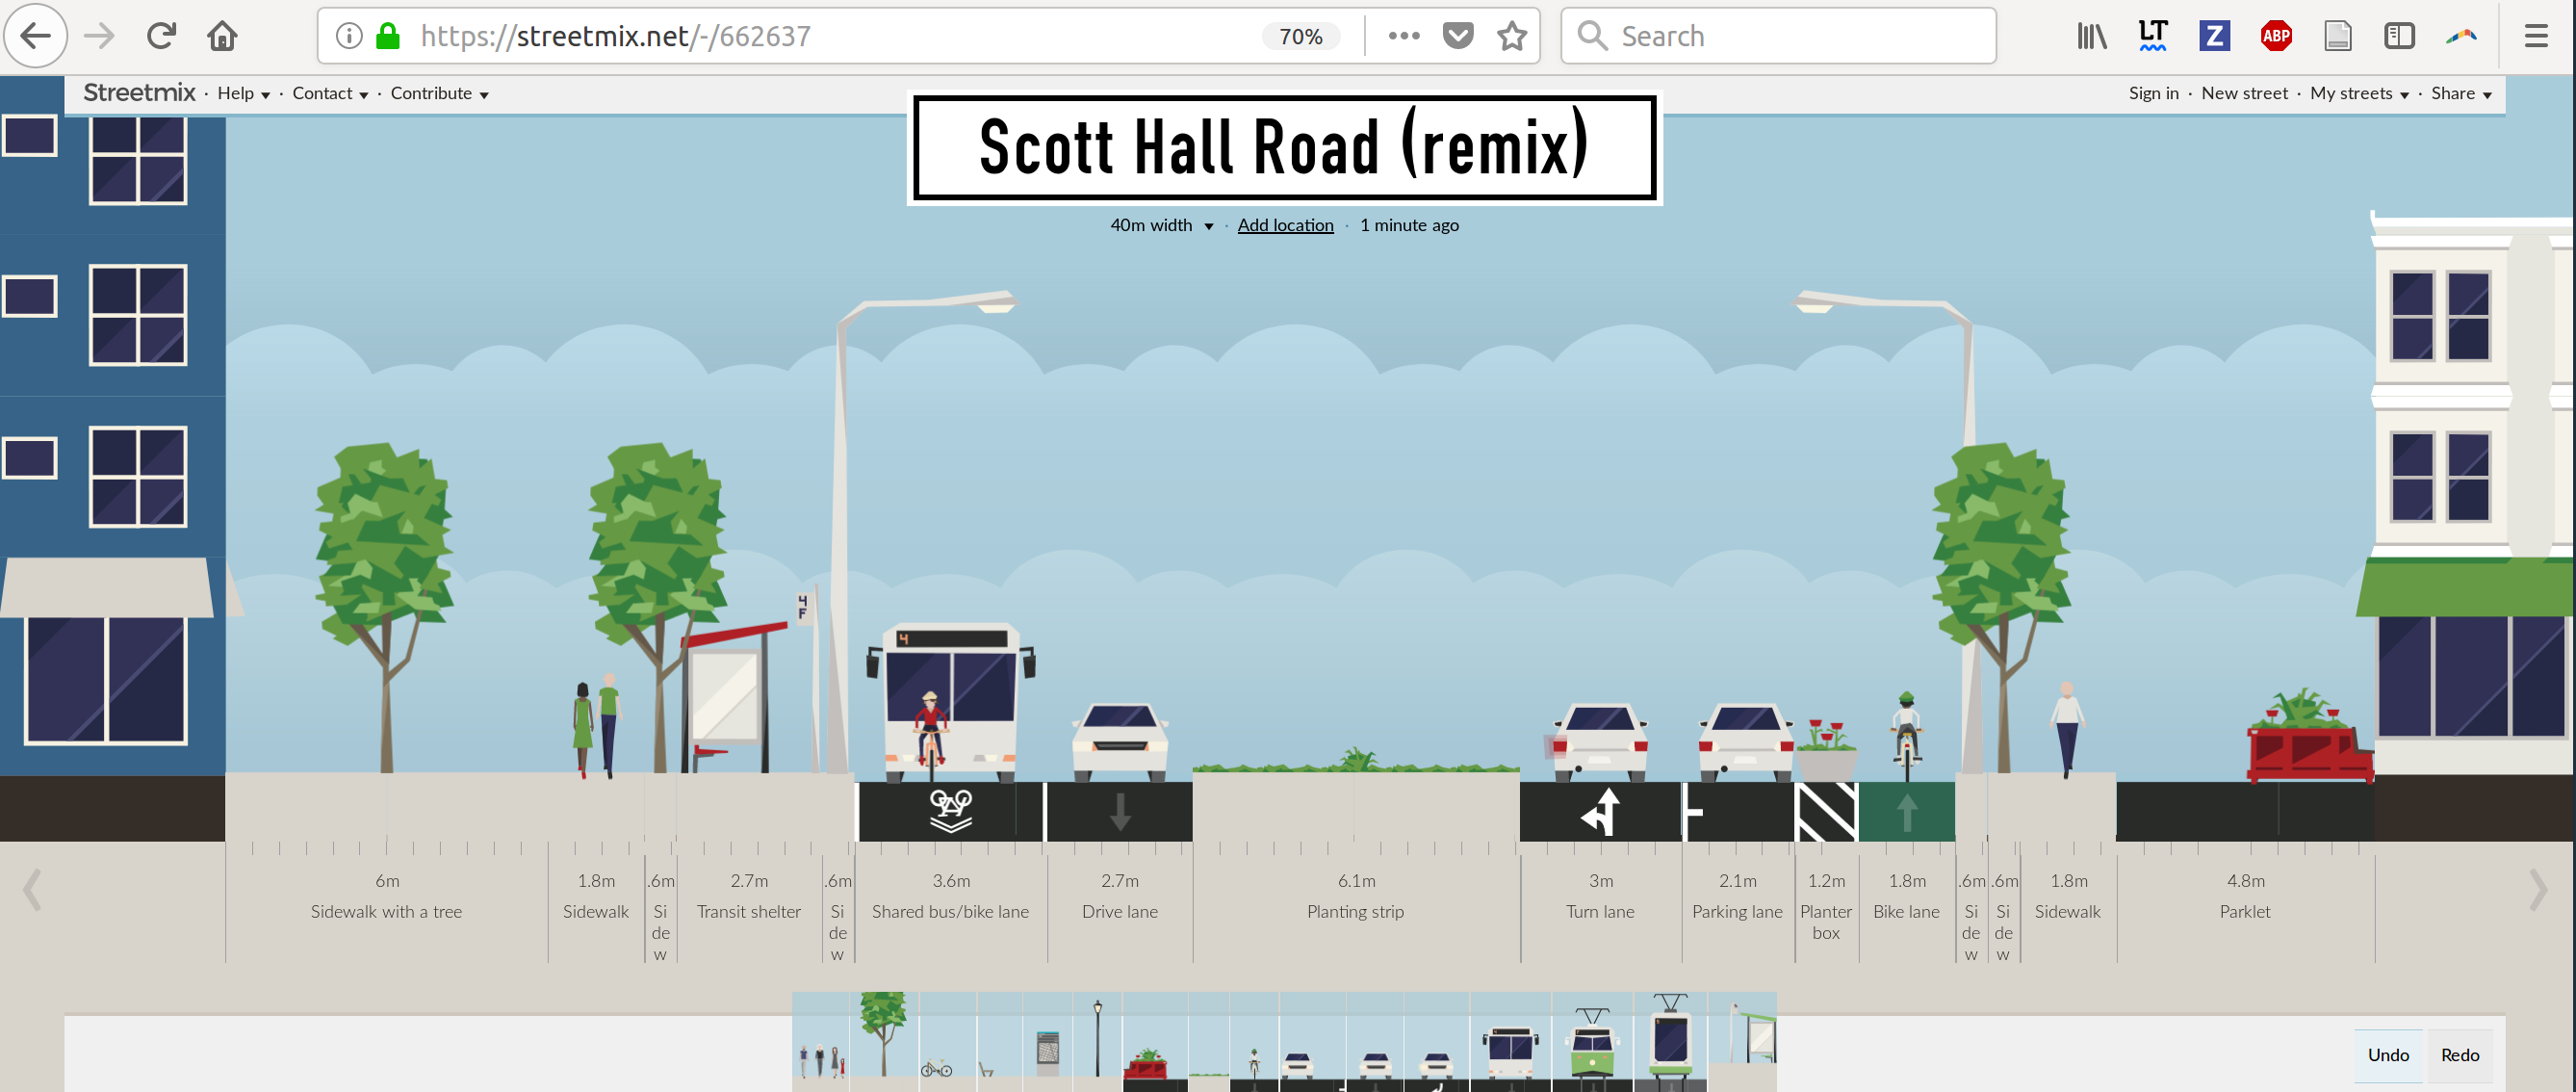 Example visualisation from the streetmix website. Could this be a way to help stakeholders assess width constraints?